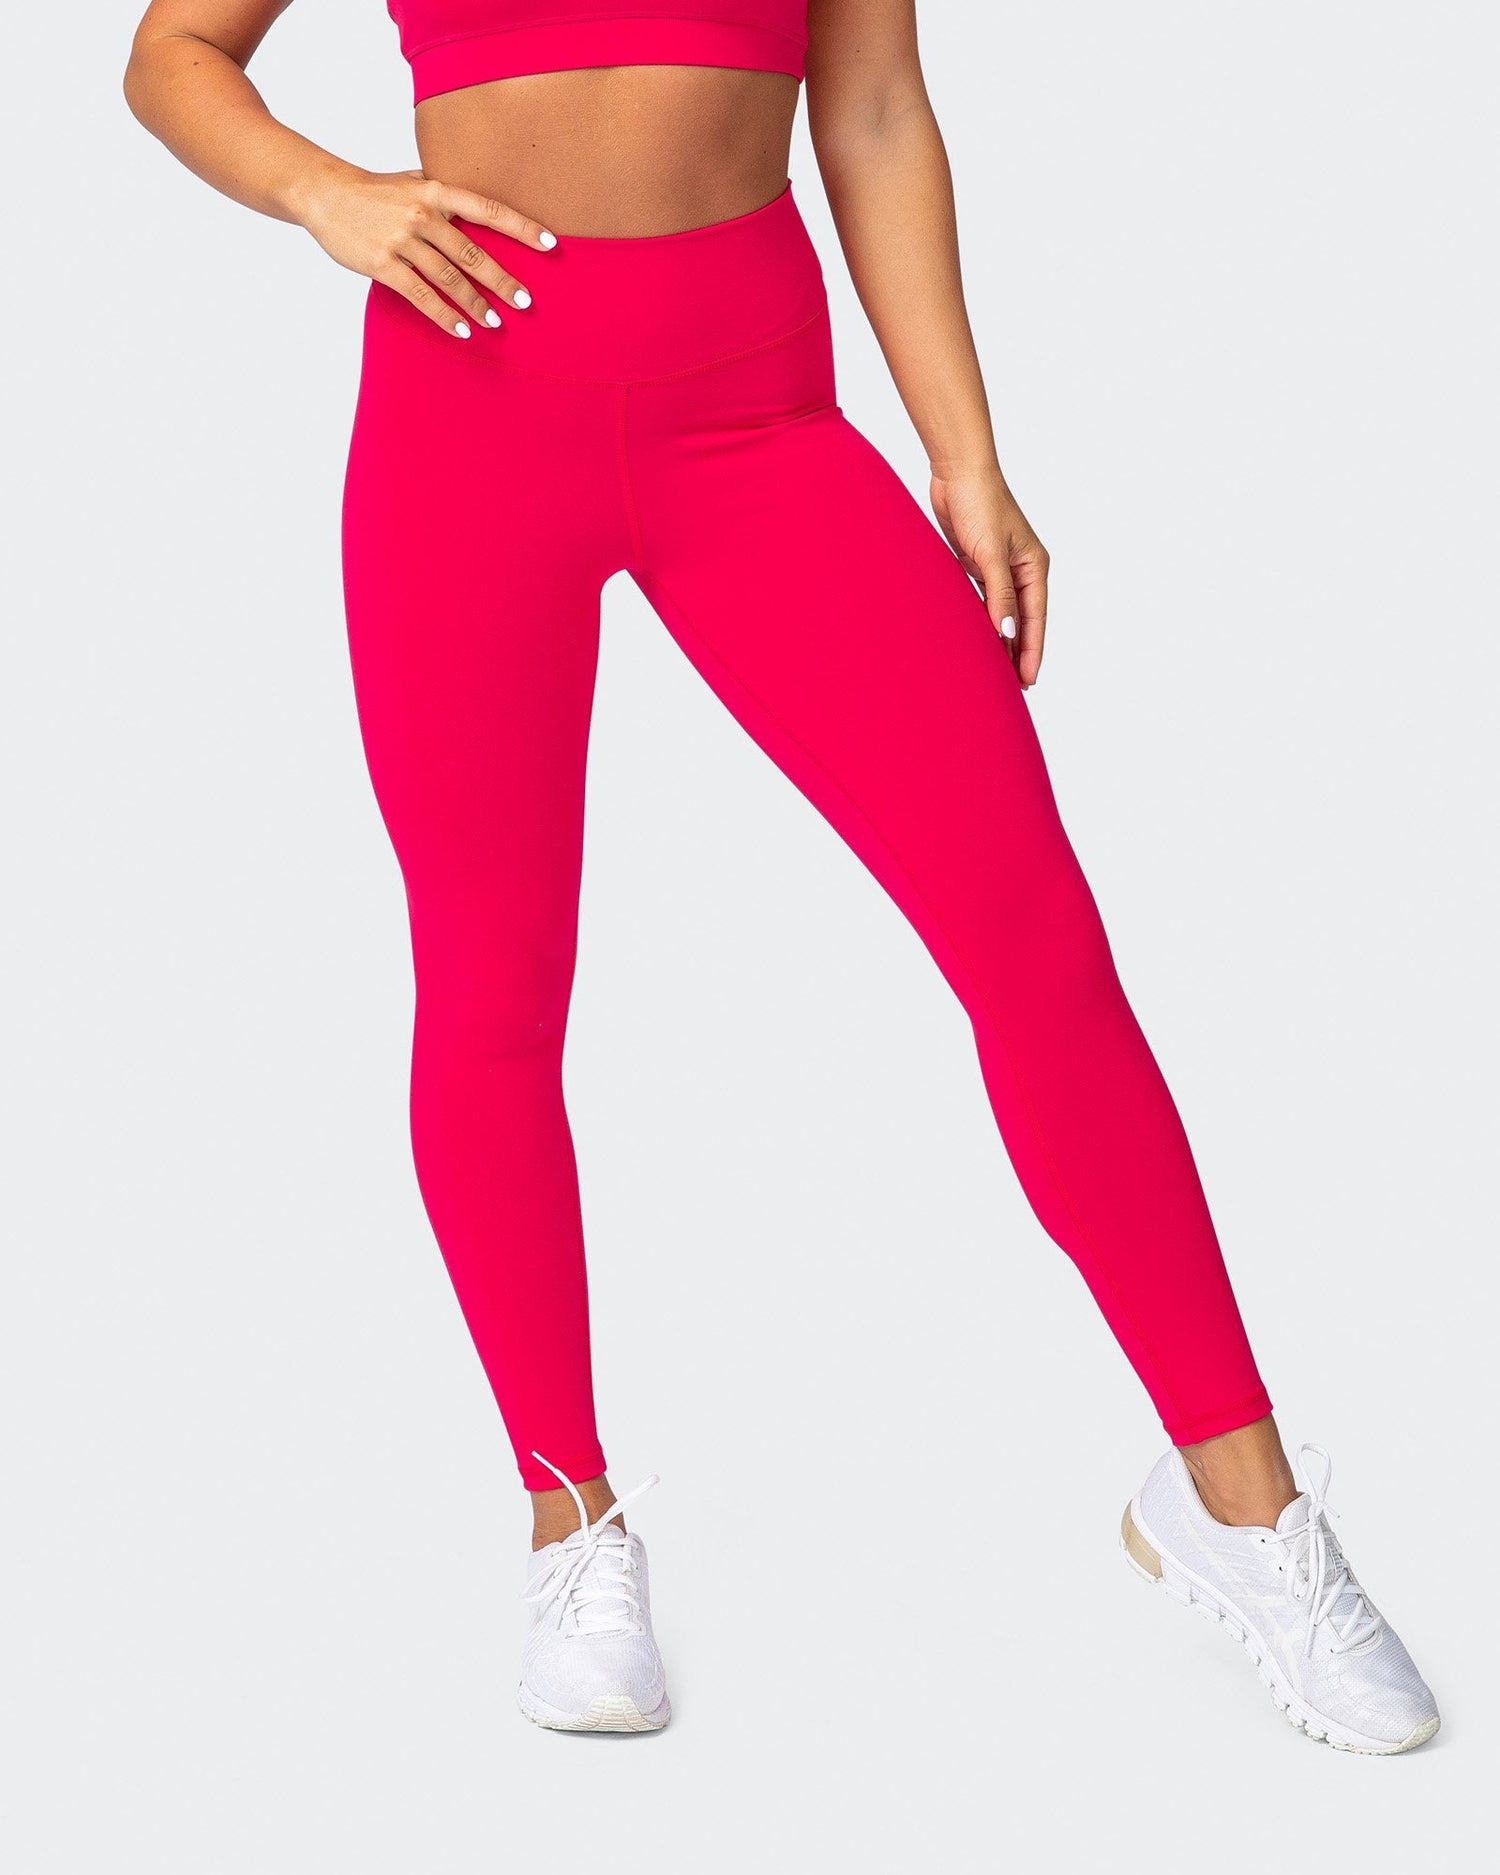 Focus On Me Ruched Leggings - Neon Pink  Ruched leggings, Neon pink, Plus  size models